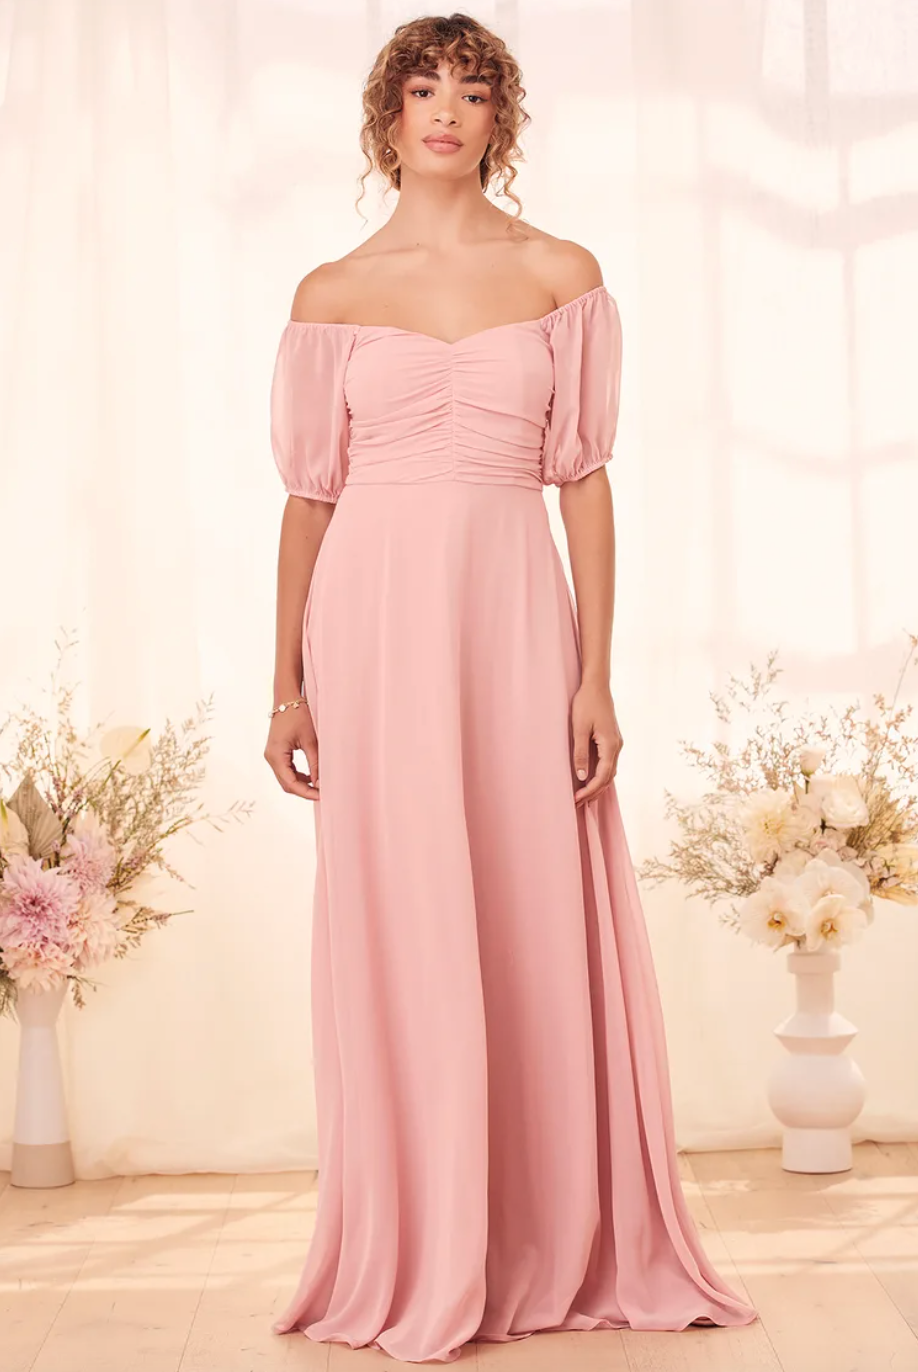 Bridesmaid dress of woven chiffon that shapes a sweetheart neckline